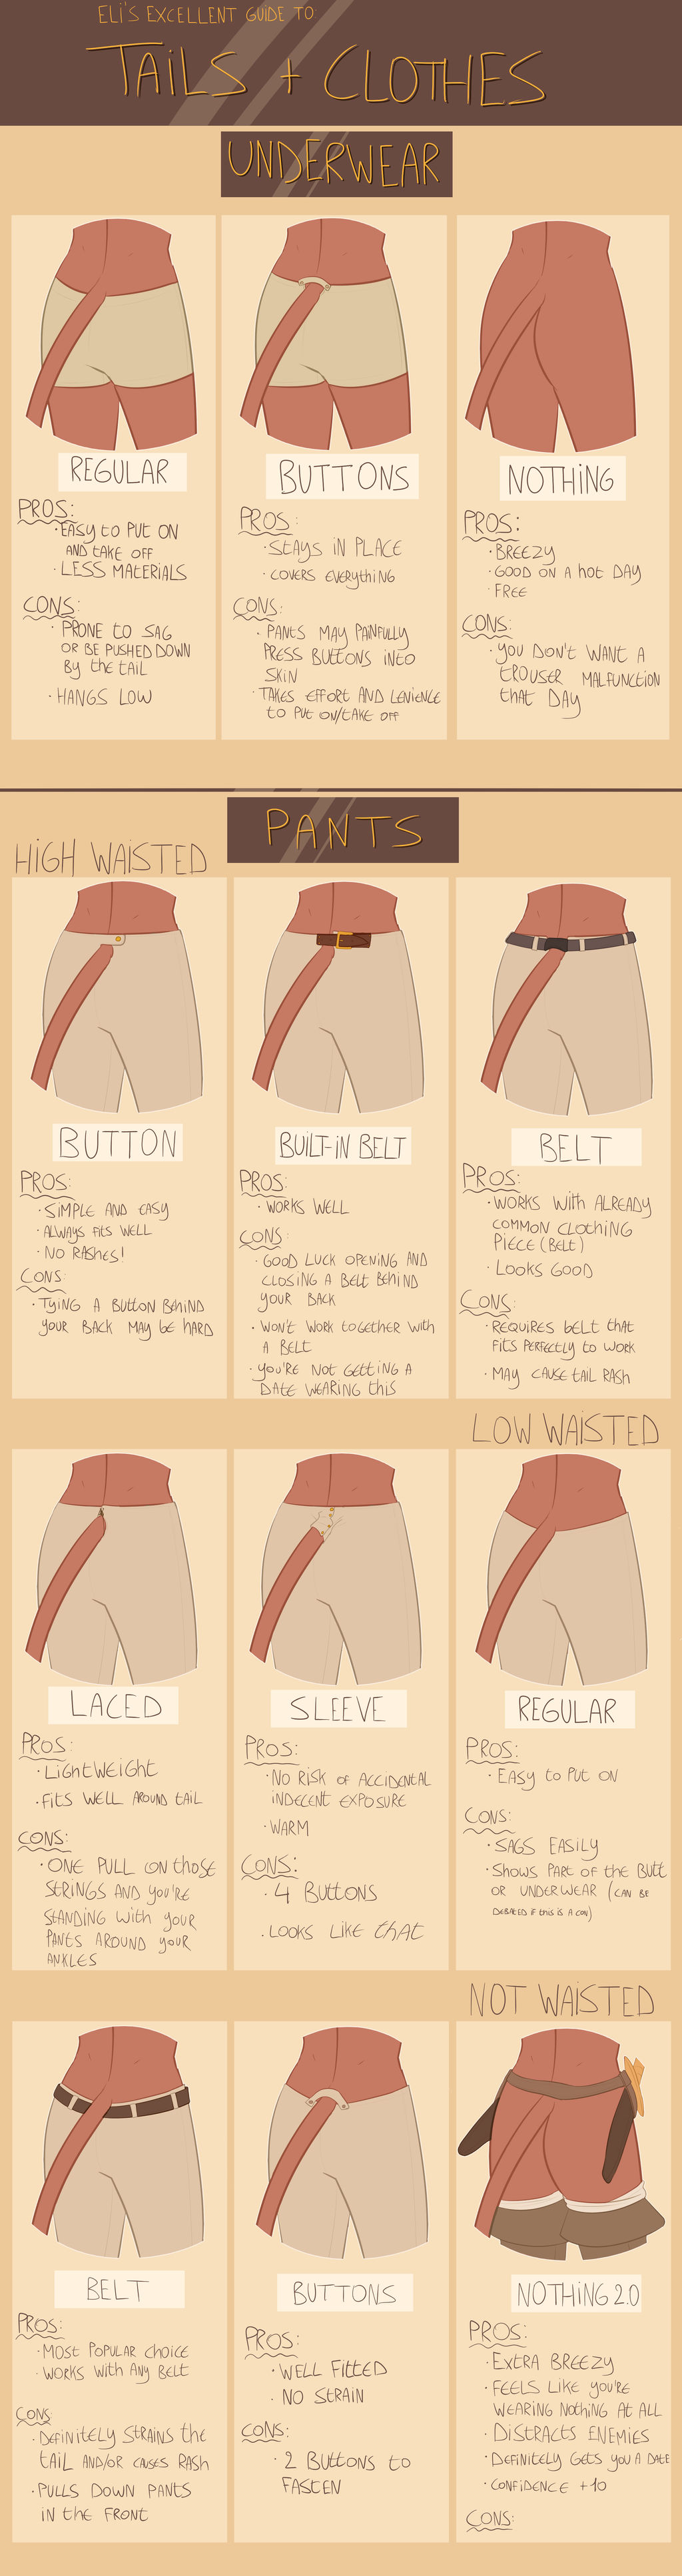 Tails and Clothing: A Guide by ElithianFox on DeviantArt